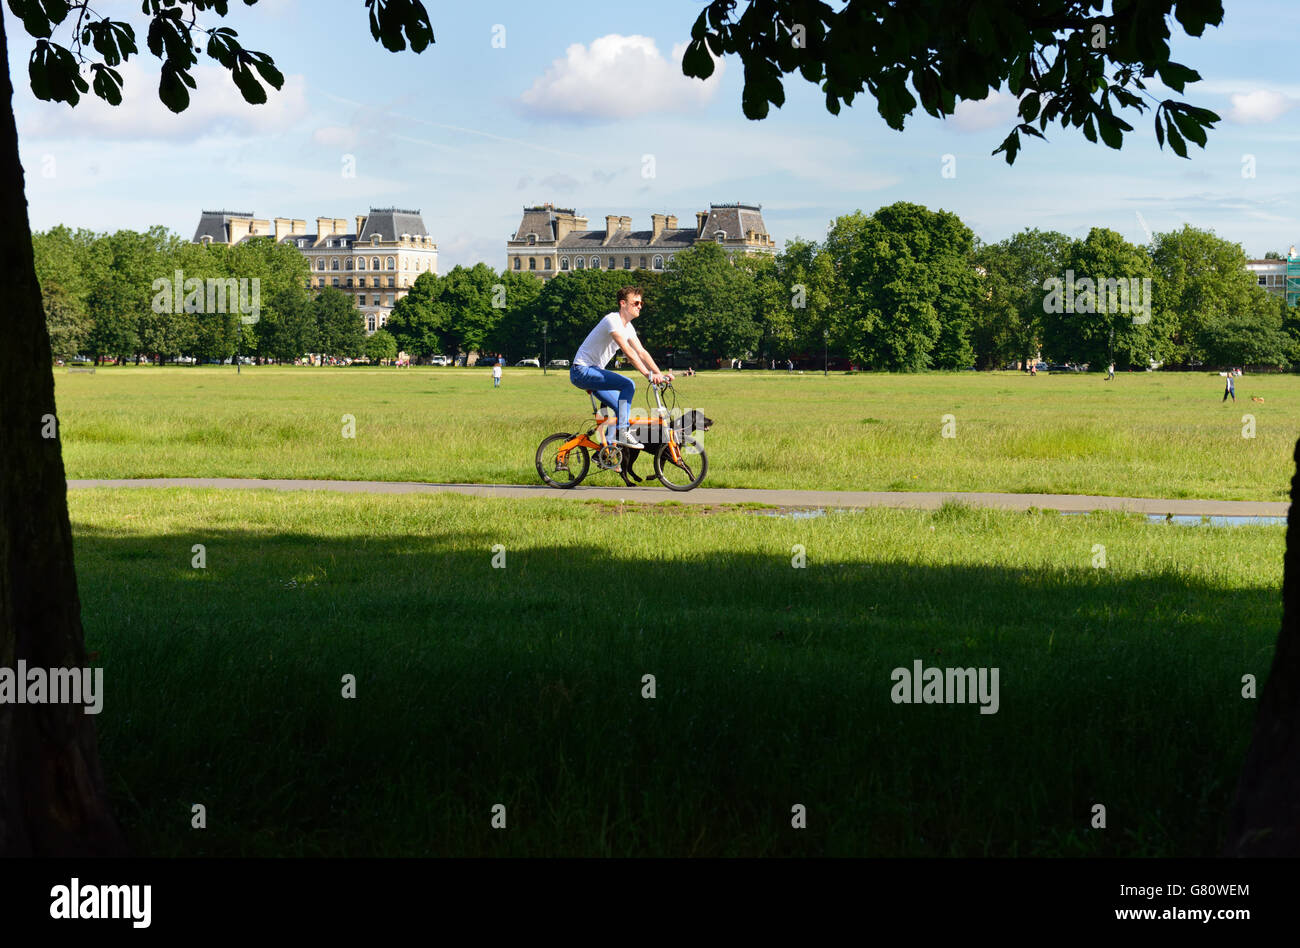 Young man on bicycle with dog, Clapham Common, London SW4, United Kingdom Stock Photo